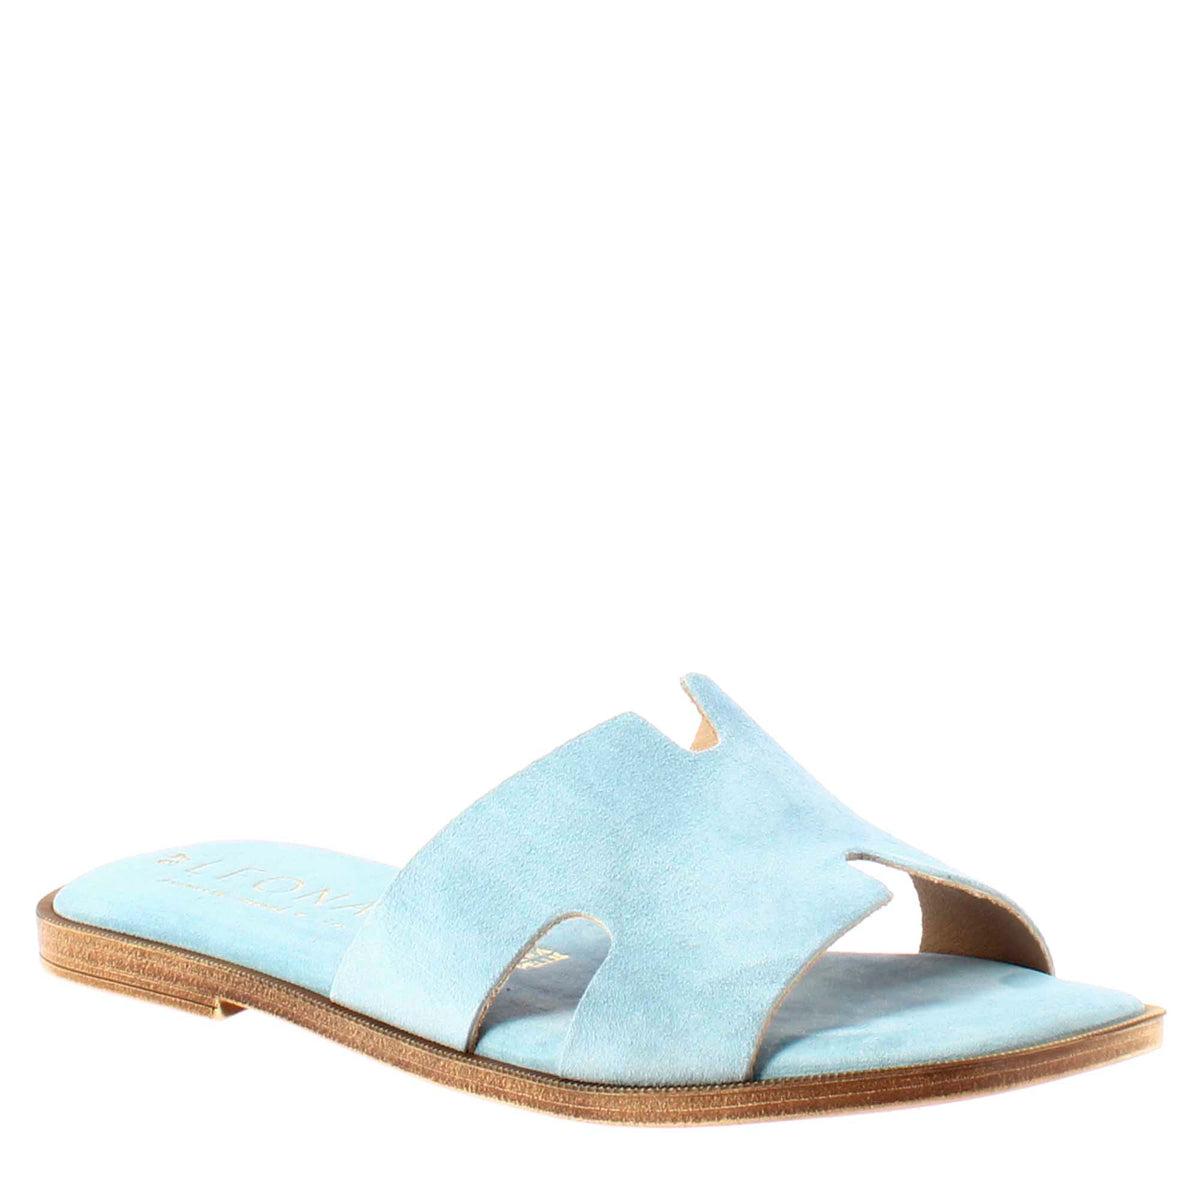 Women's H-shaped sandals in light blue suede